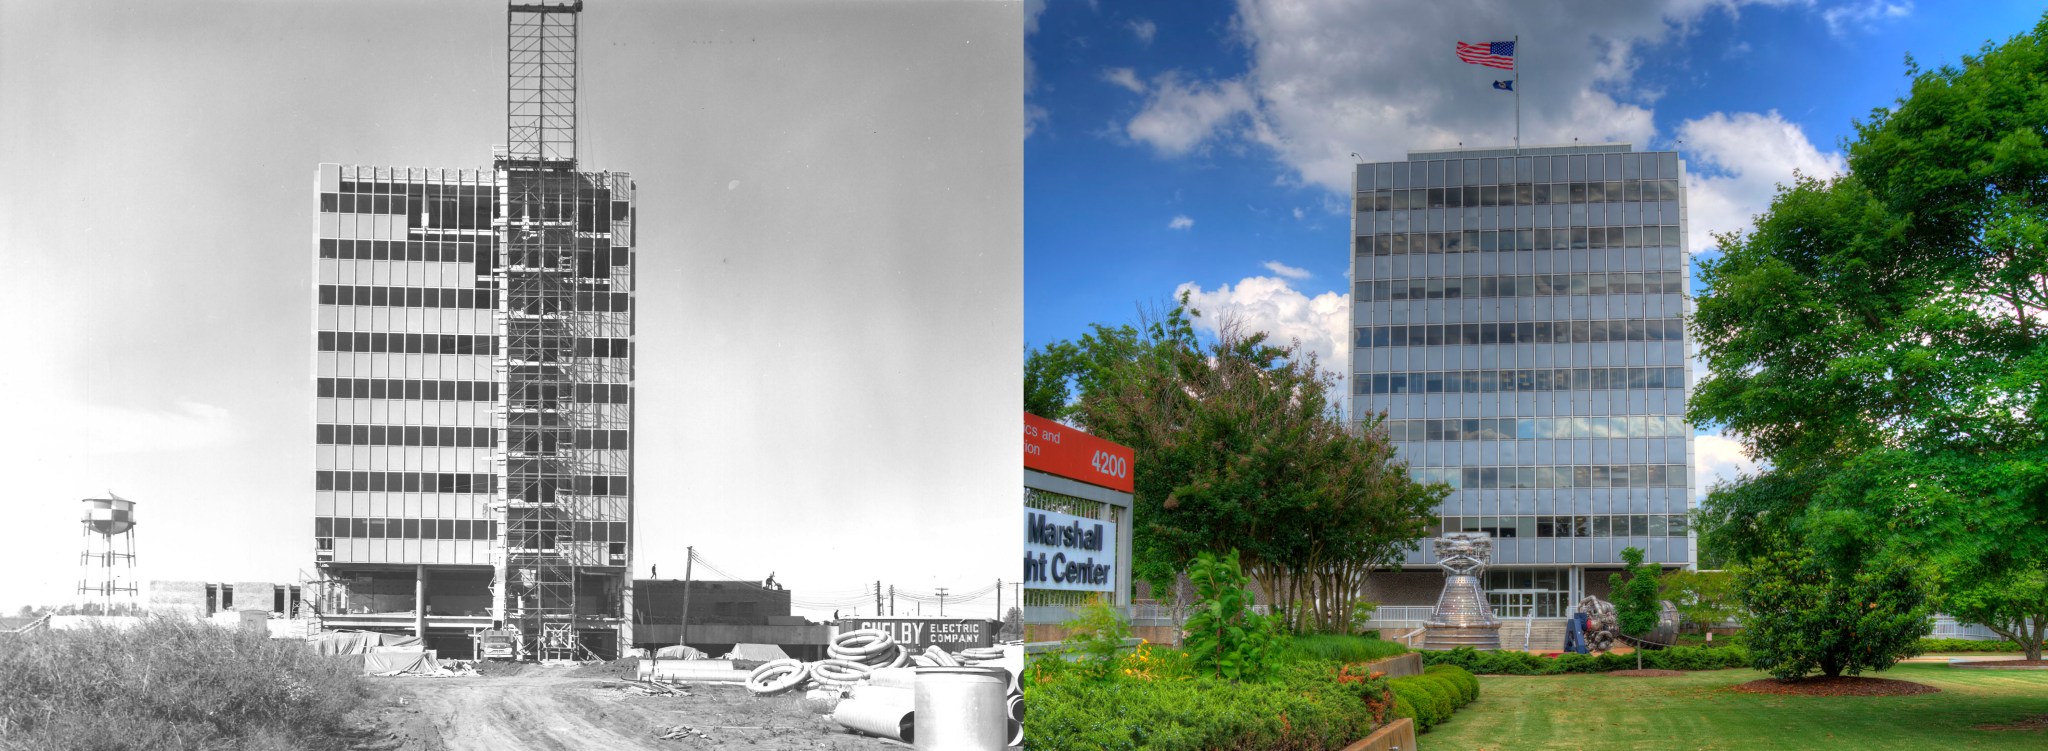 At left, contractors work to erect Building 4200, the Marshall administrative headquarters, in 1962. At right, Building 4200 awaits its Oct. 29 demolition.